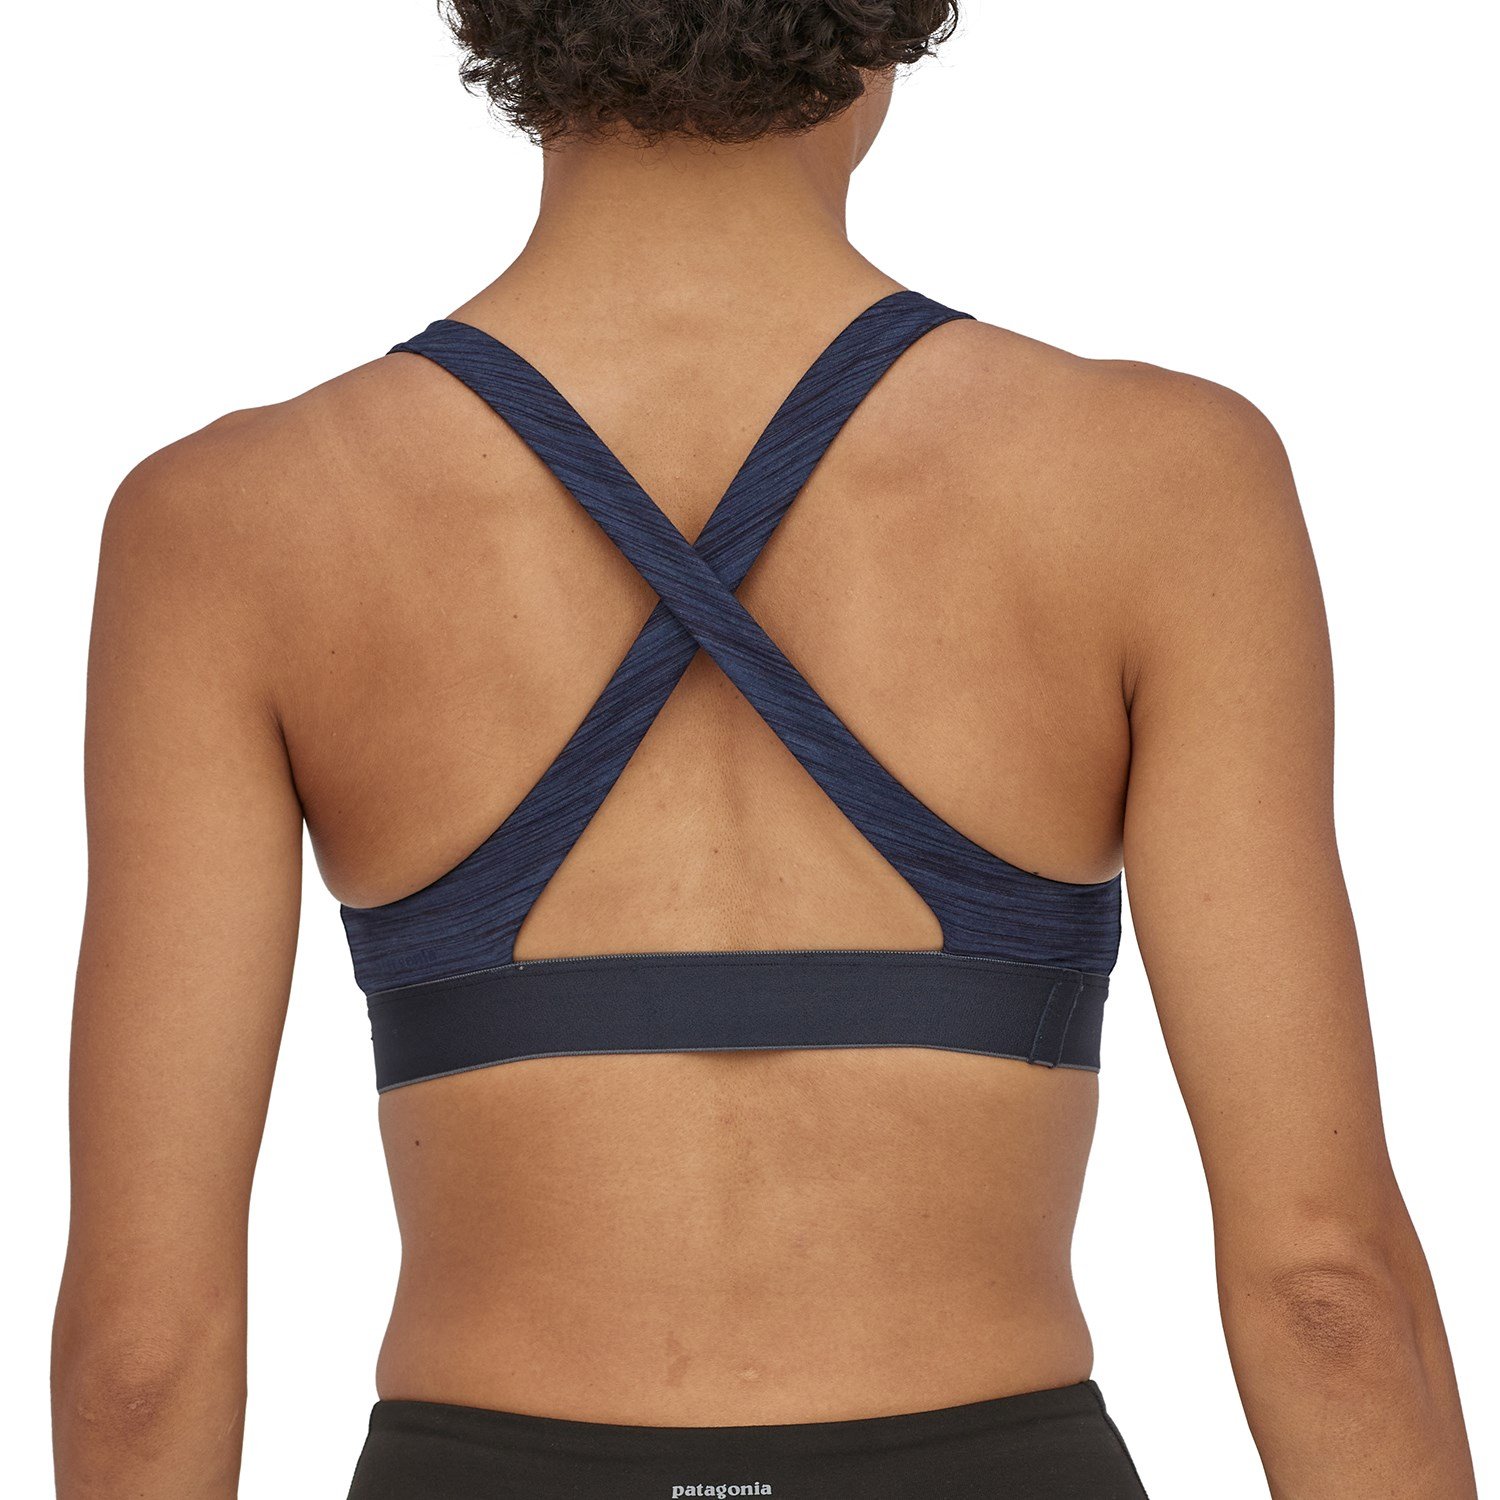 Patagonia SWITCHBACK BRA - Light support sports bra - pale periwinkle/blue  